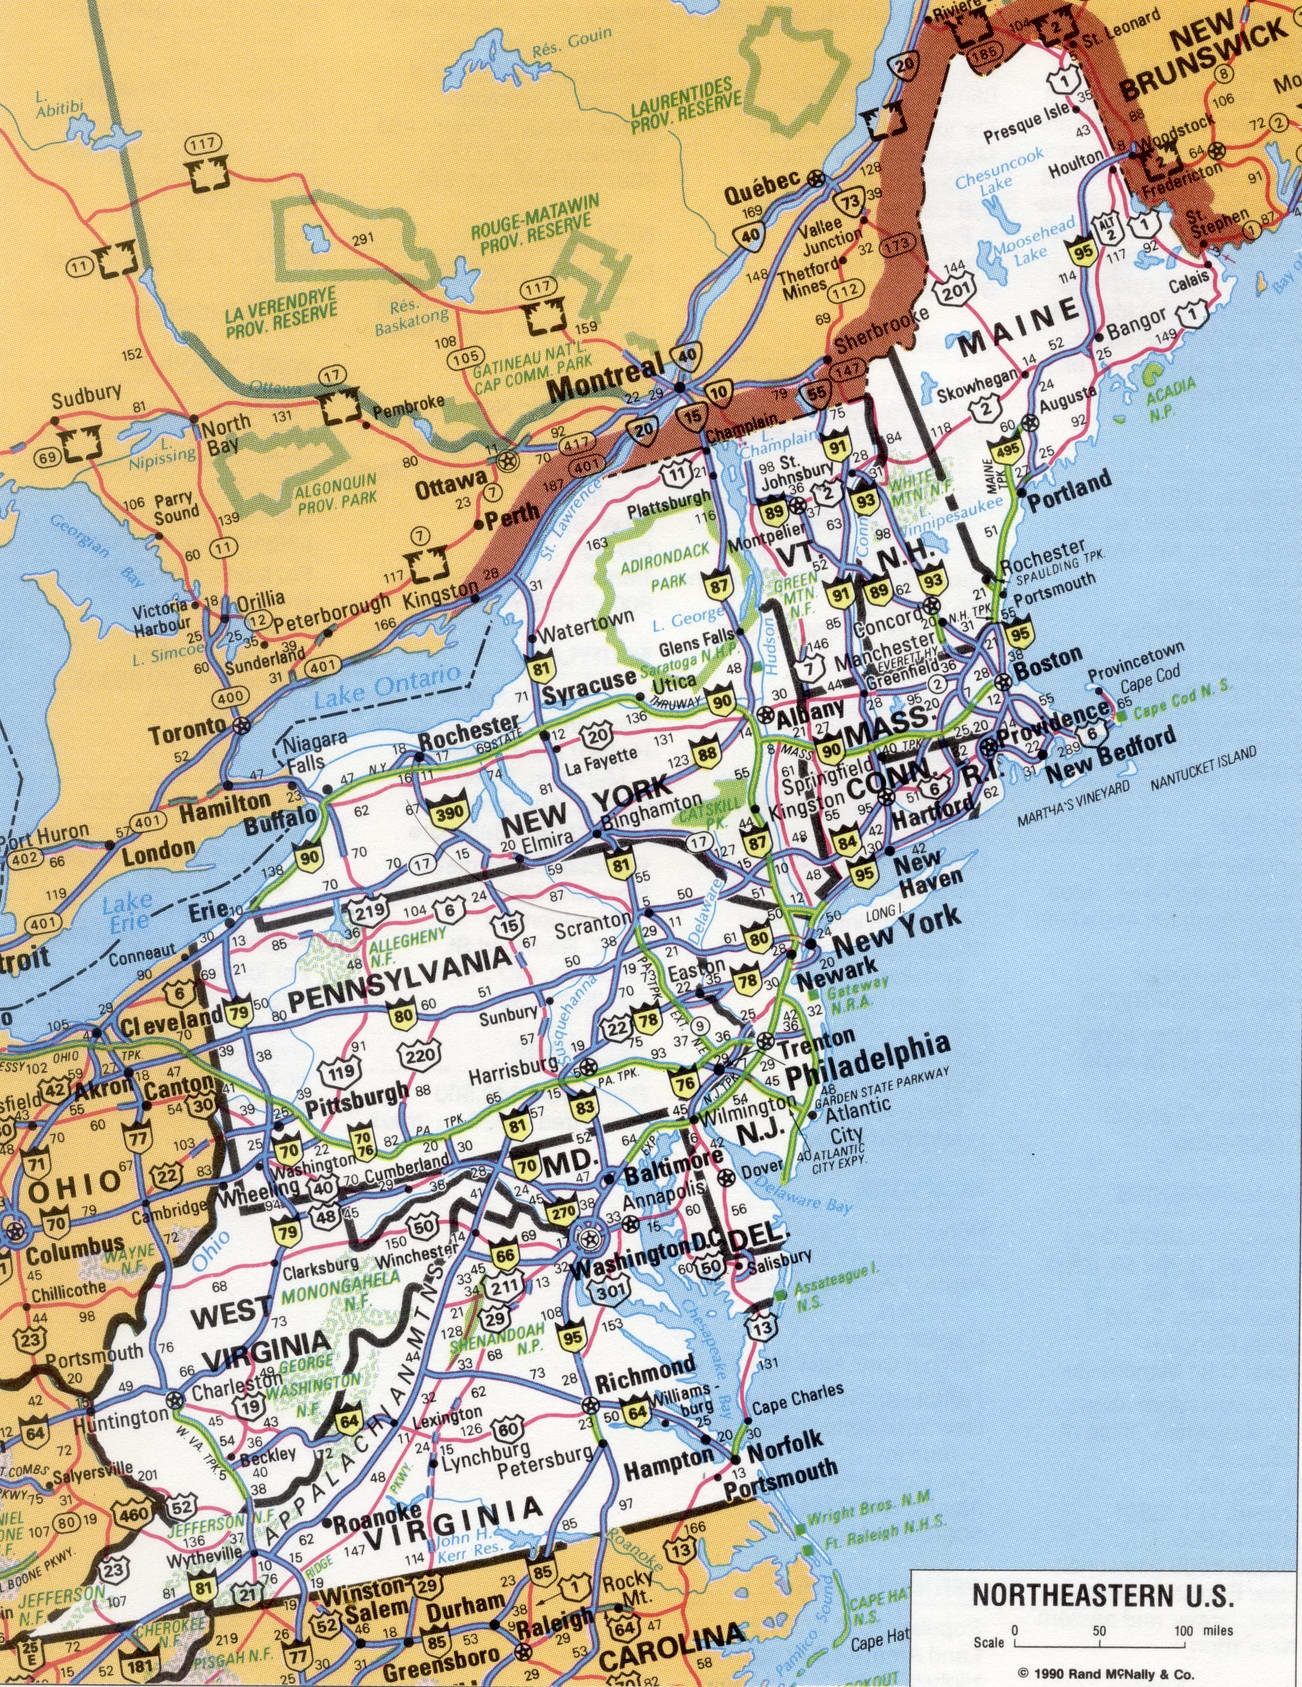 Roads map of US. Maps of the United States - highways, cities ...